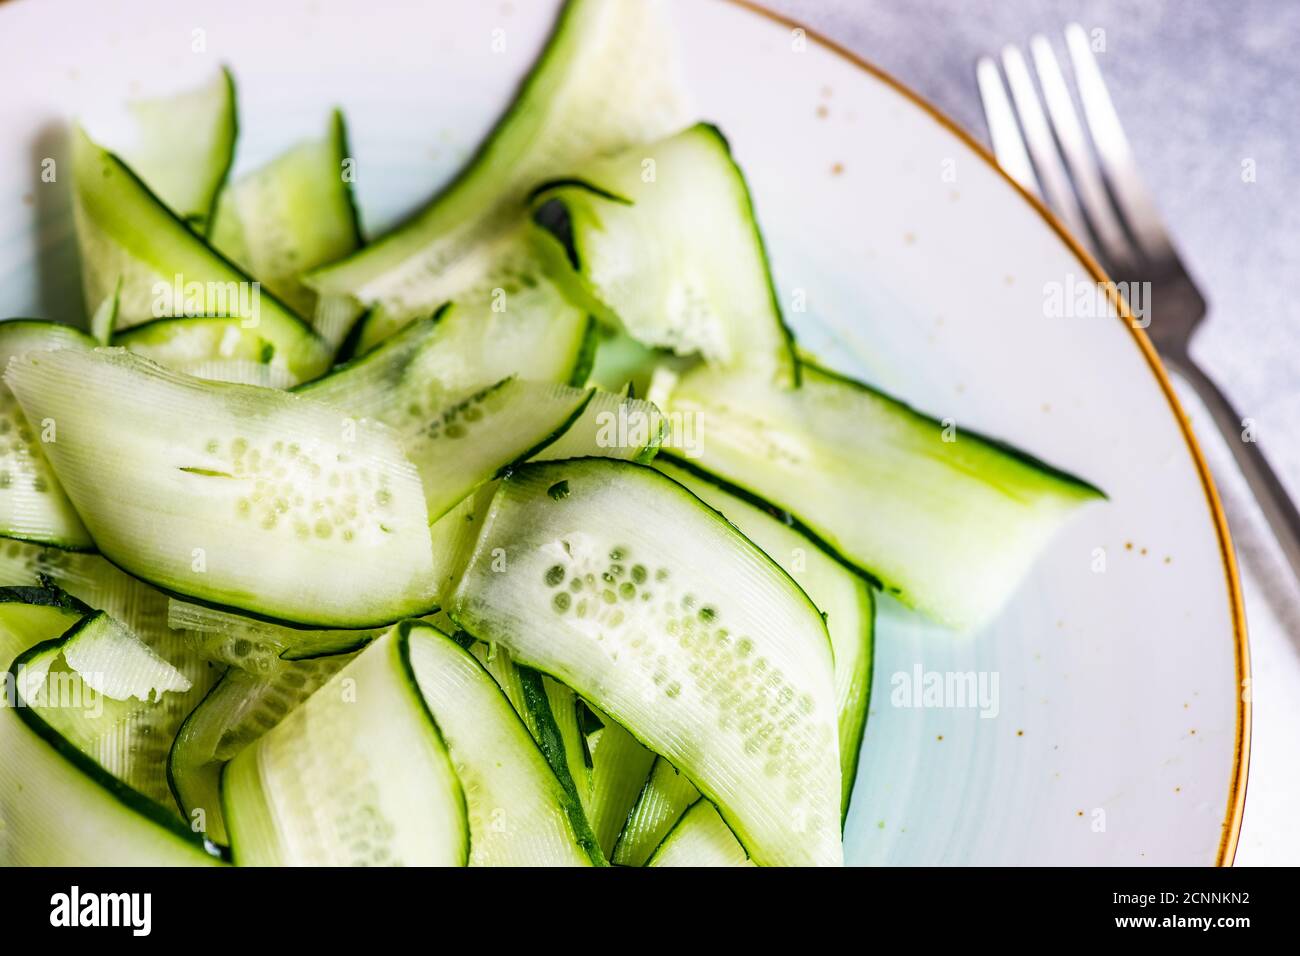 Close-up of cucumber salad on a plate Stock Photo